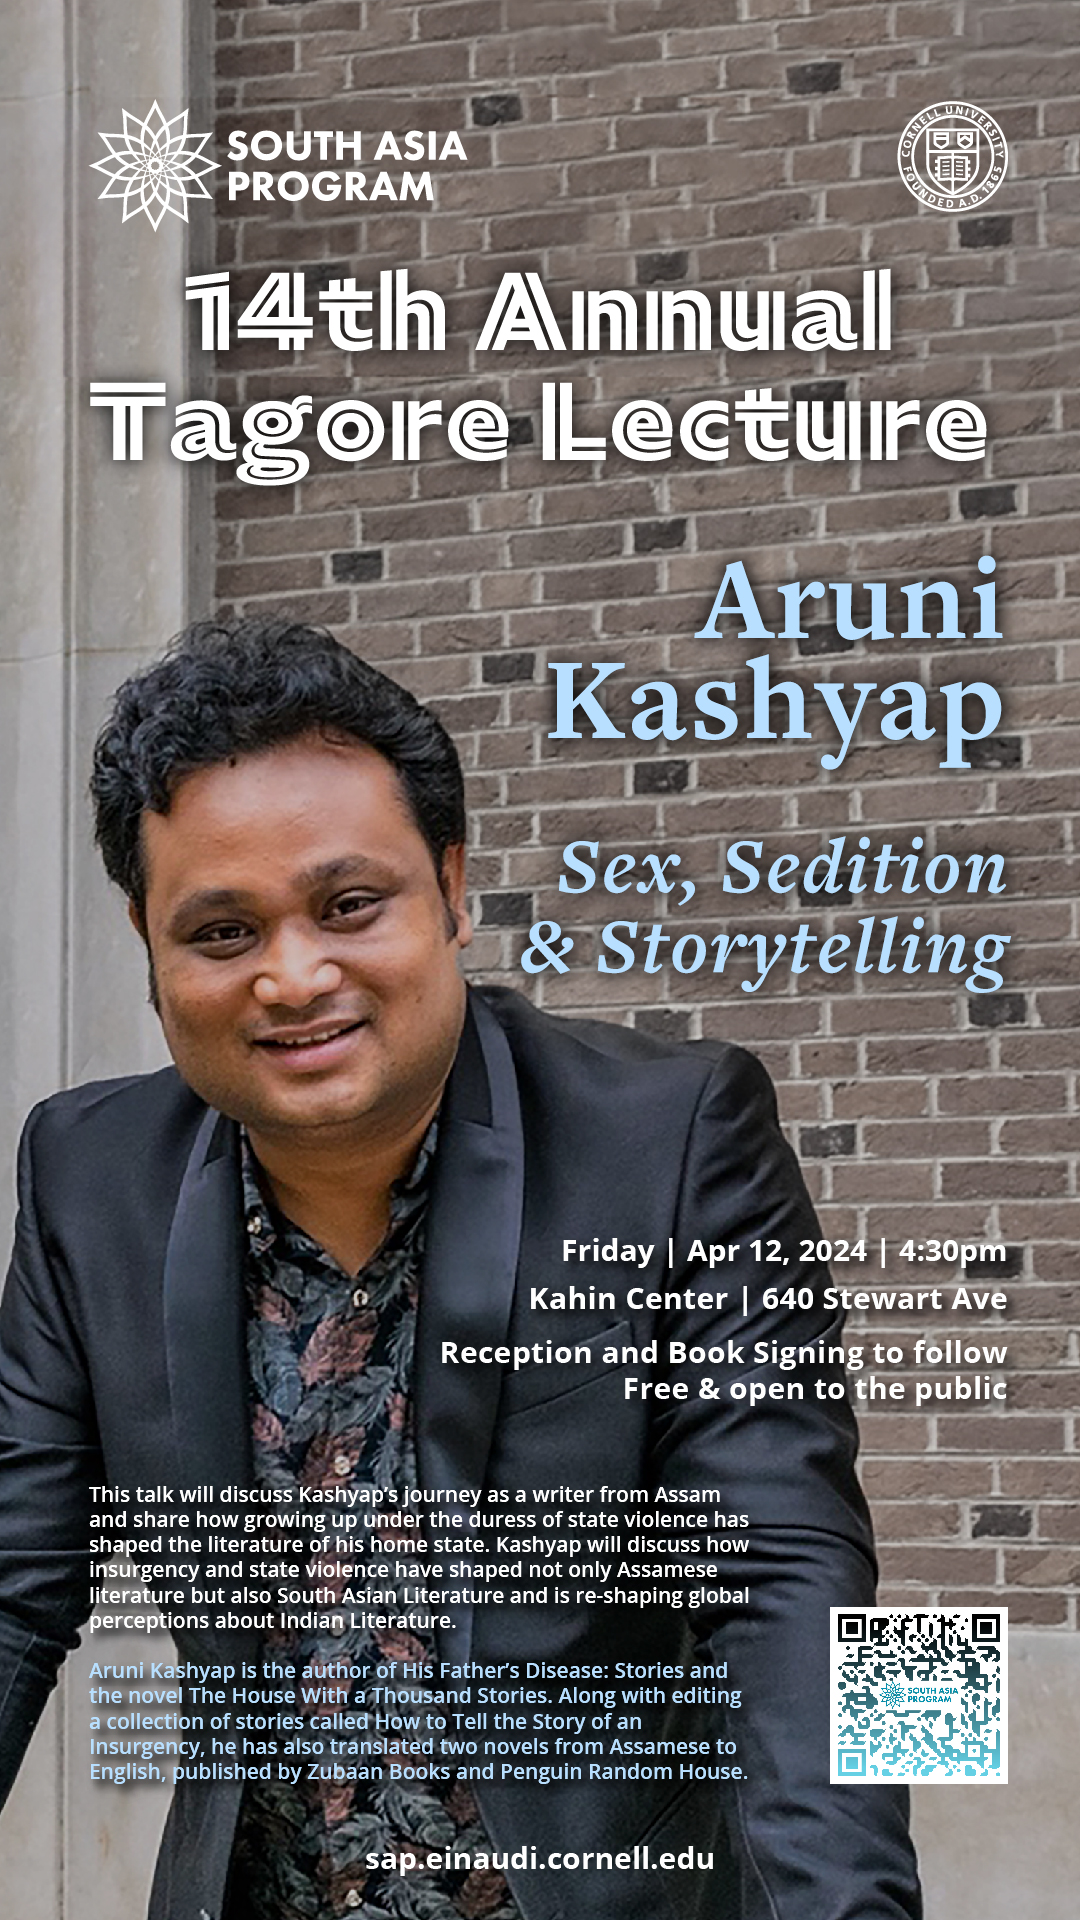 Aruni Kashyap Tagore Lecture Flyer